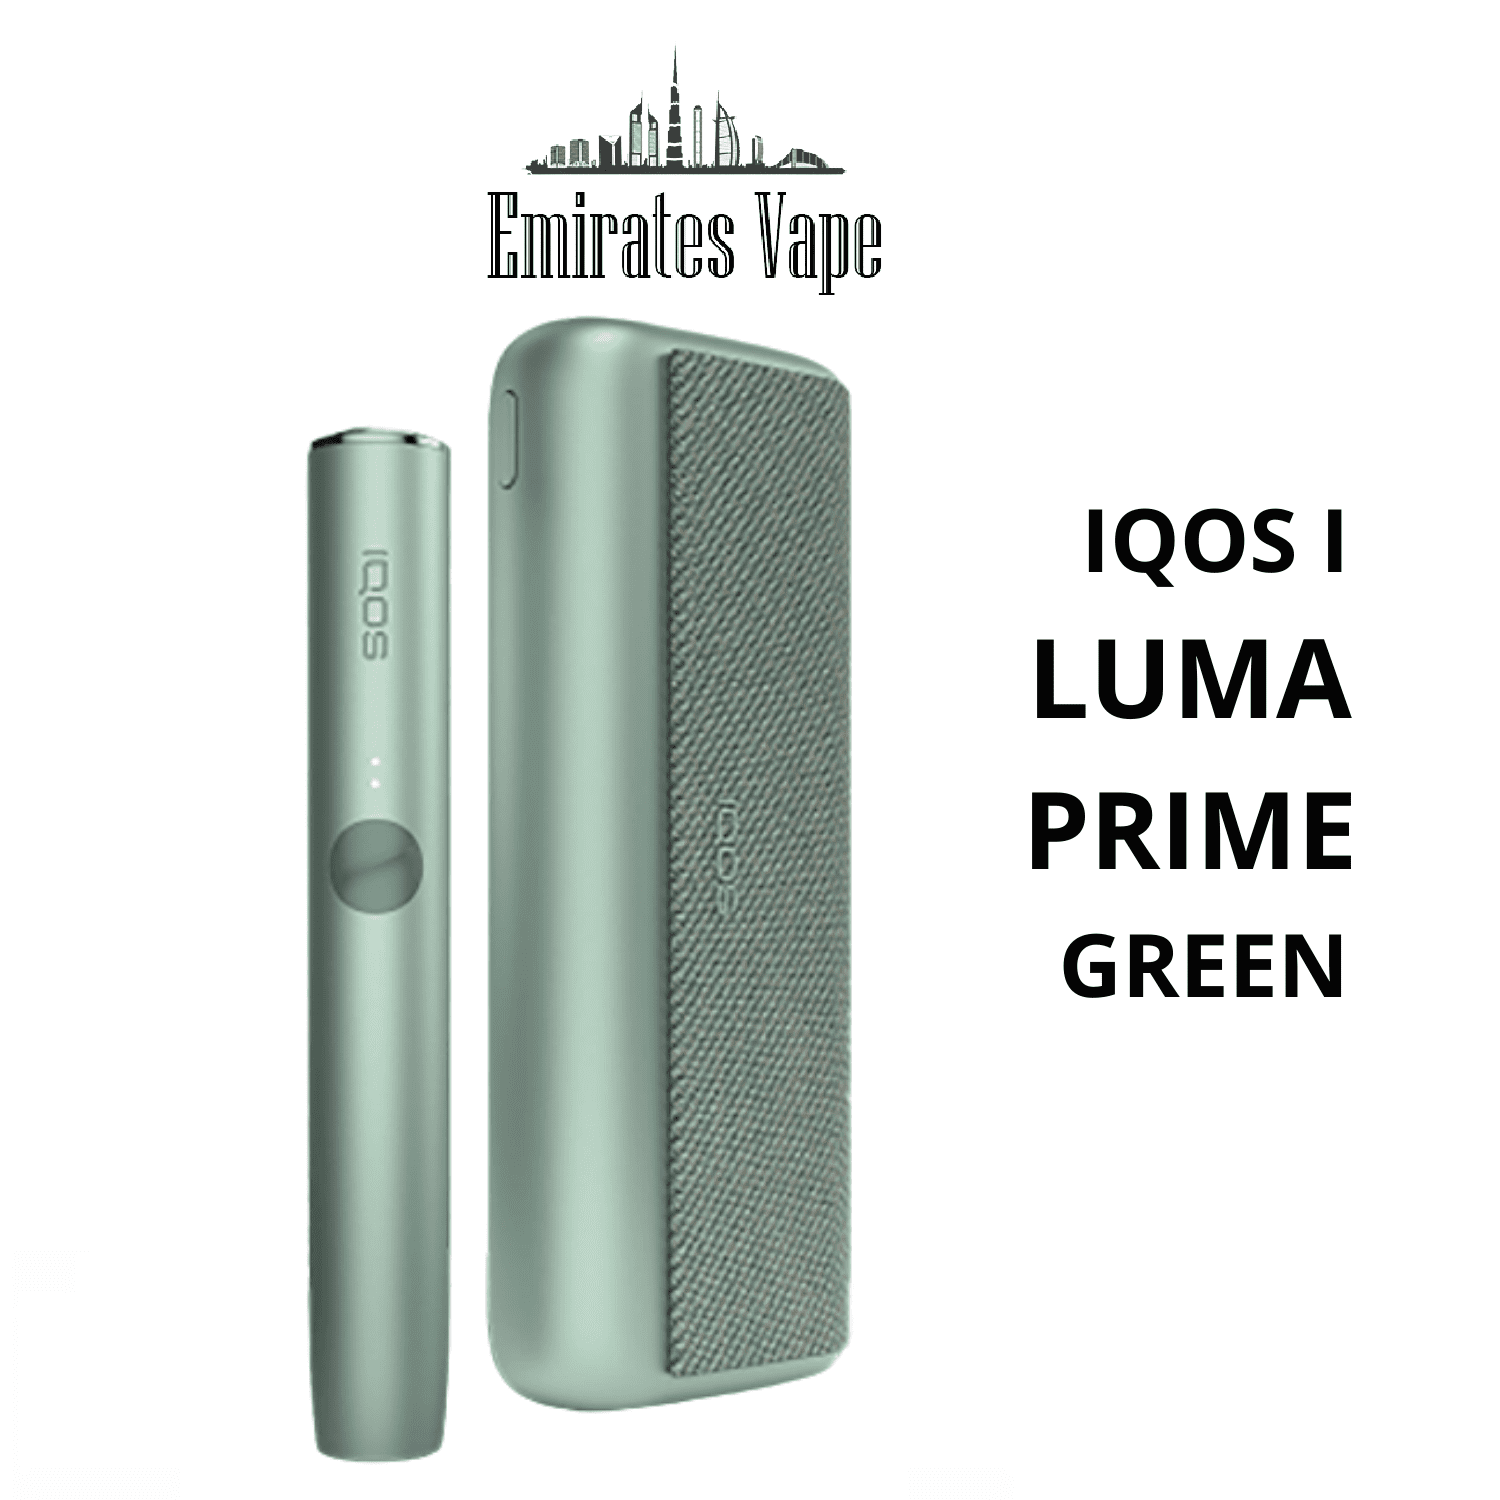 How to Use IQOS ILUMA PRIME, Getting Started